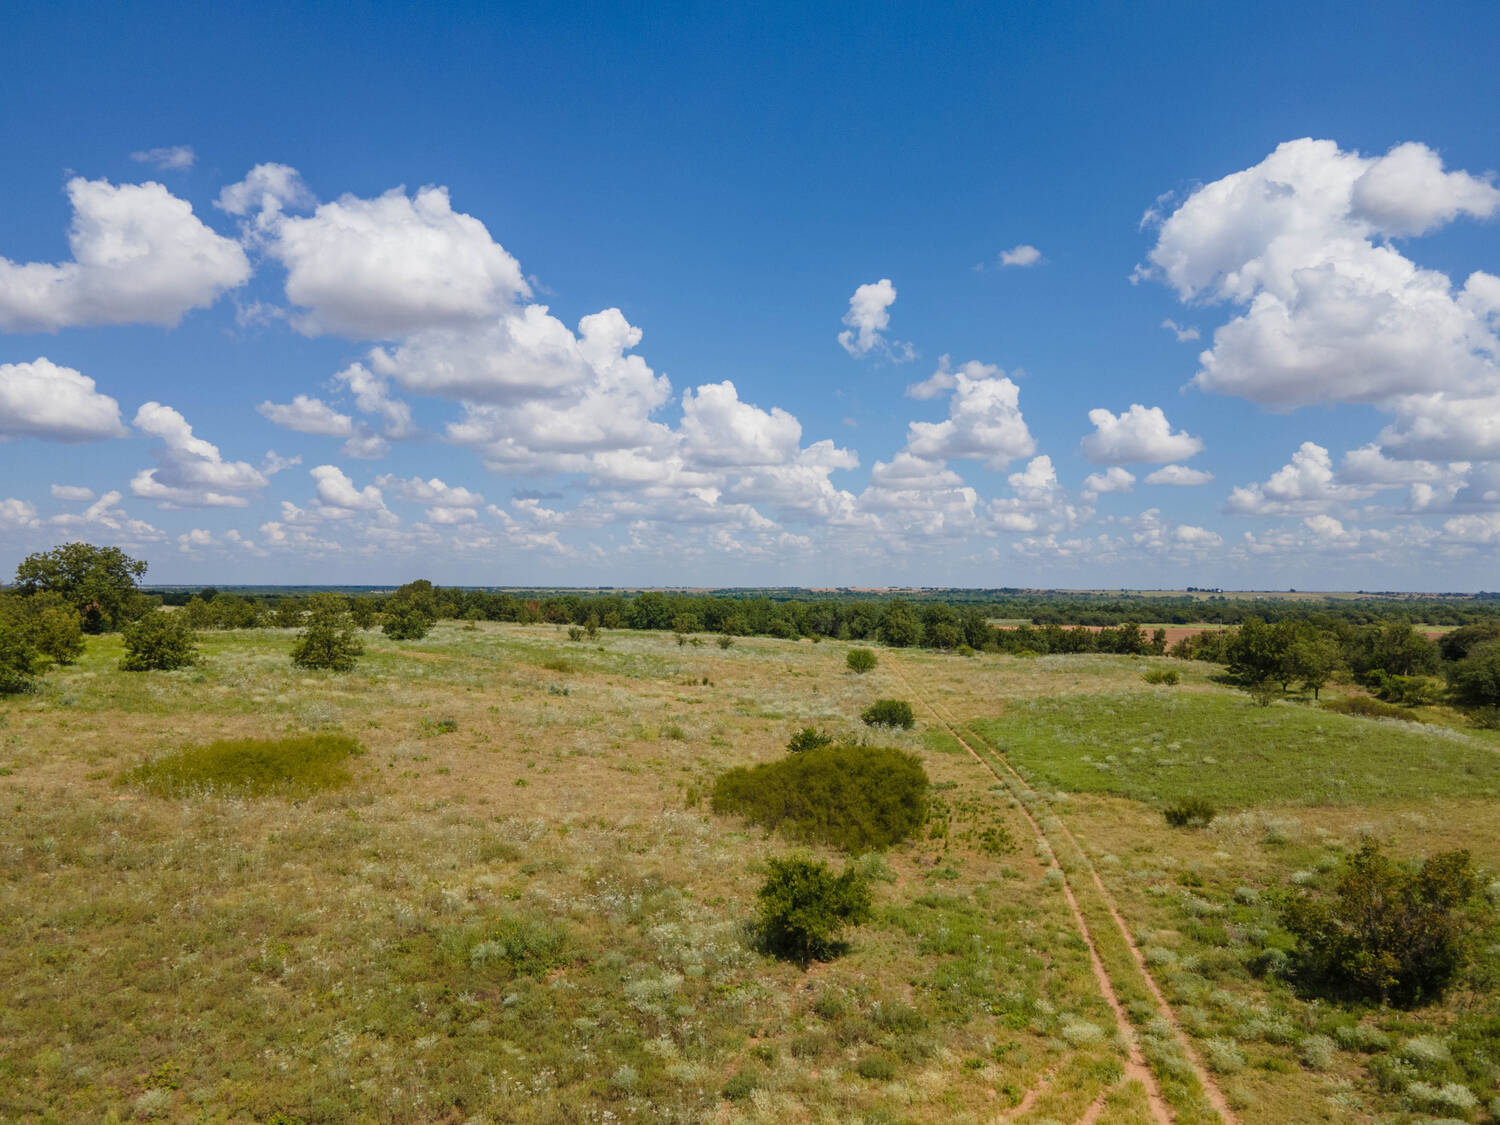 The-Pecan-Tract-Clay-County-Pecan-Orchard-Hunting-Ranch-TX-Republic-Ranches-Bryan-Pickens-15-of-15